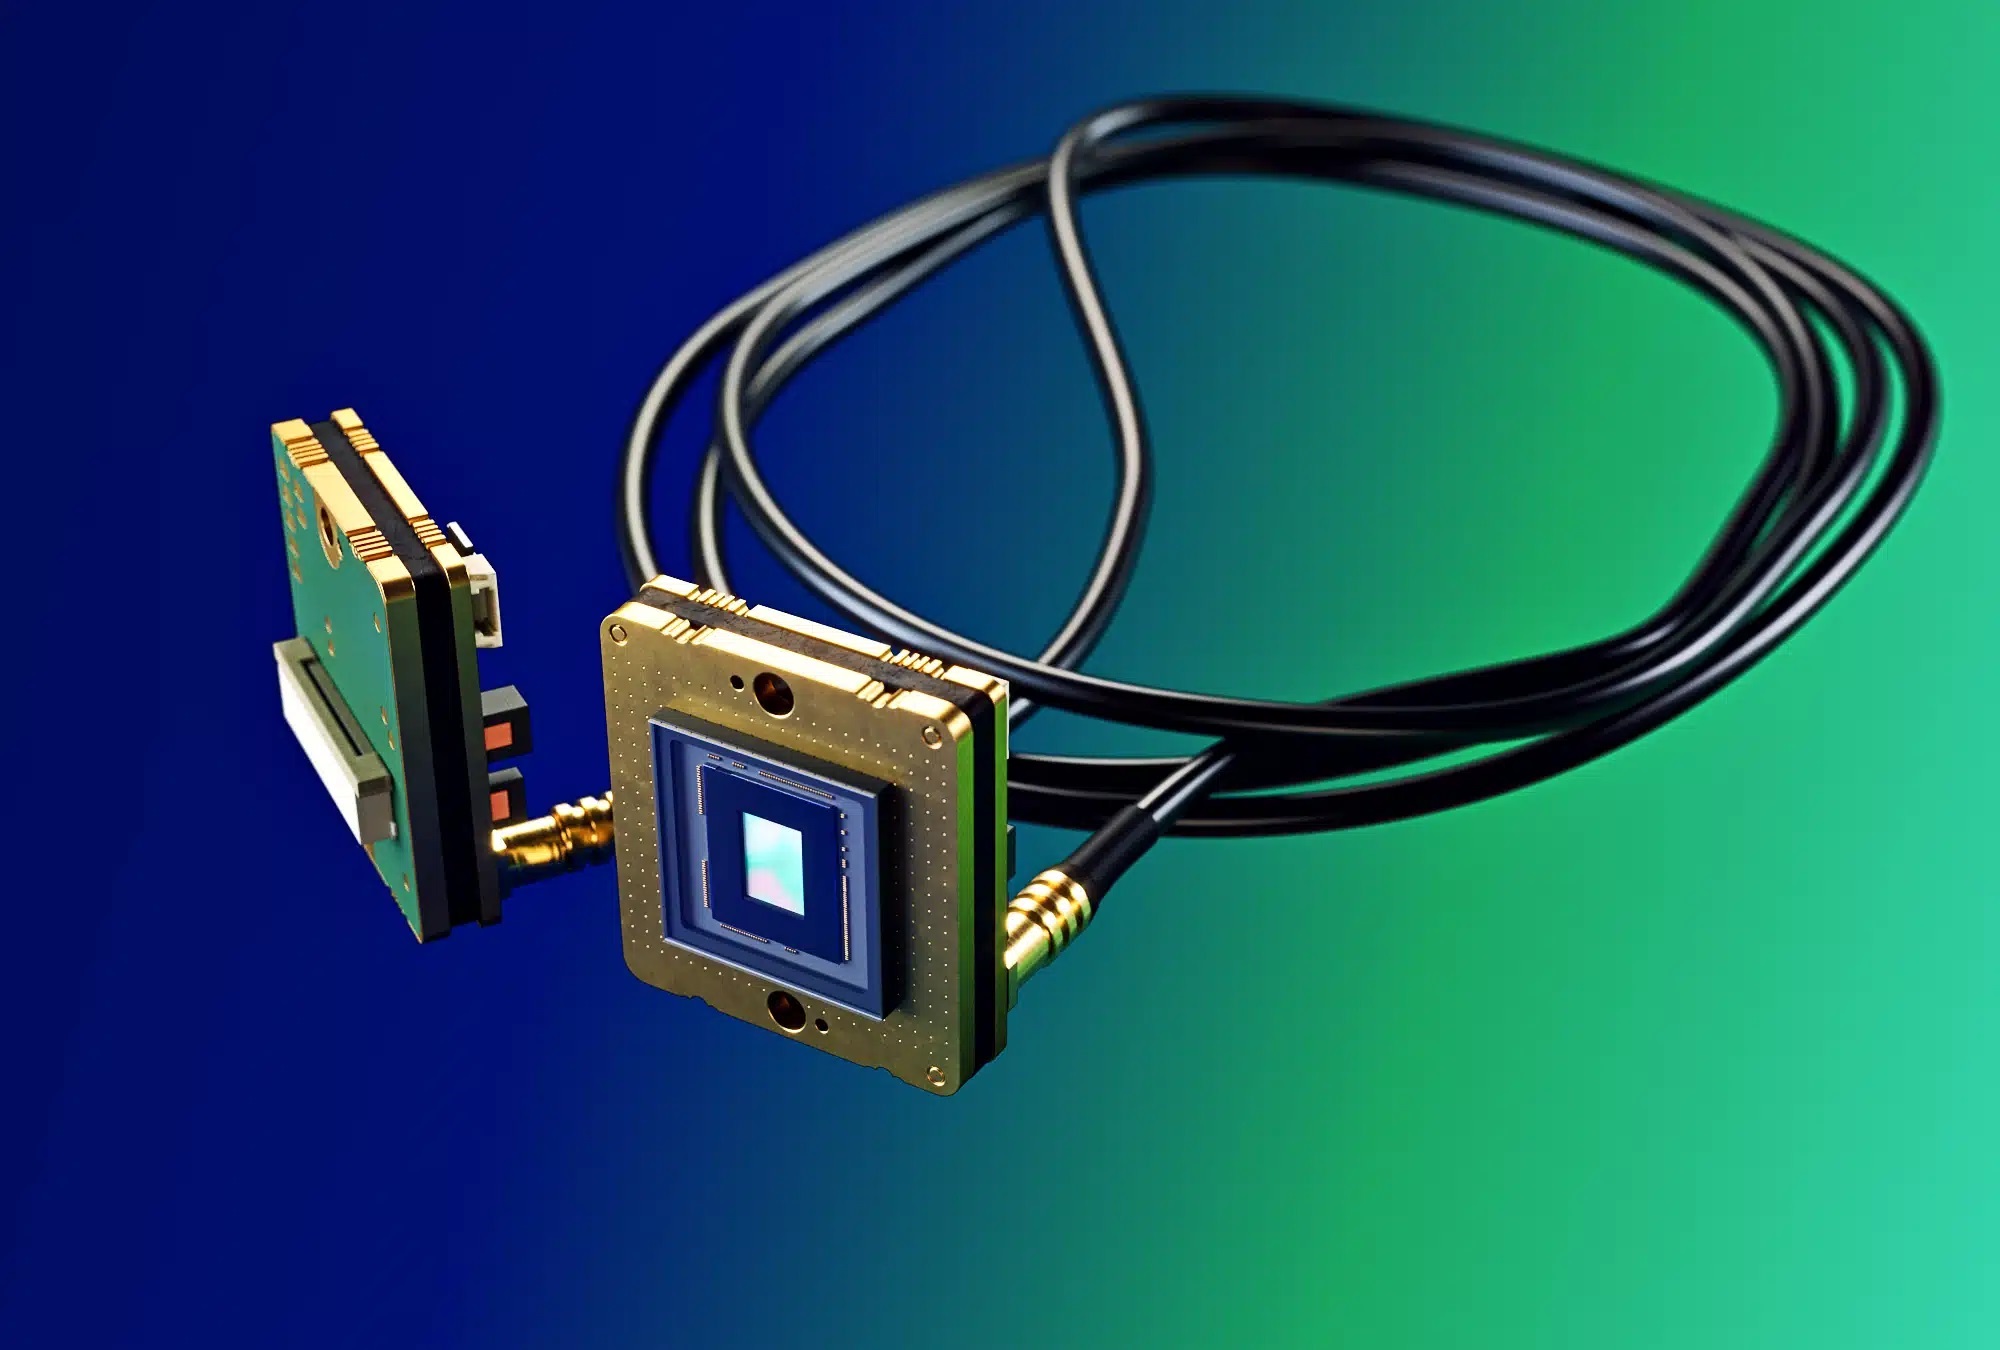 VC MIPI Cameras are now available with GMSL2 interface for data transmission with a cable length of up to 10 meters. The company also offers a corresponding deserializer.